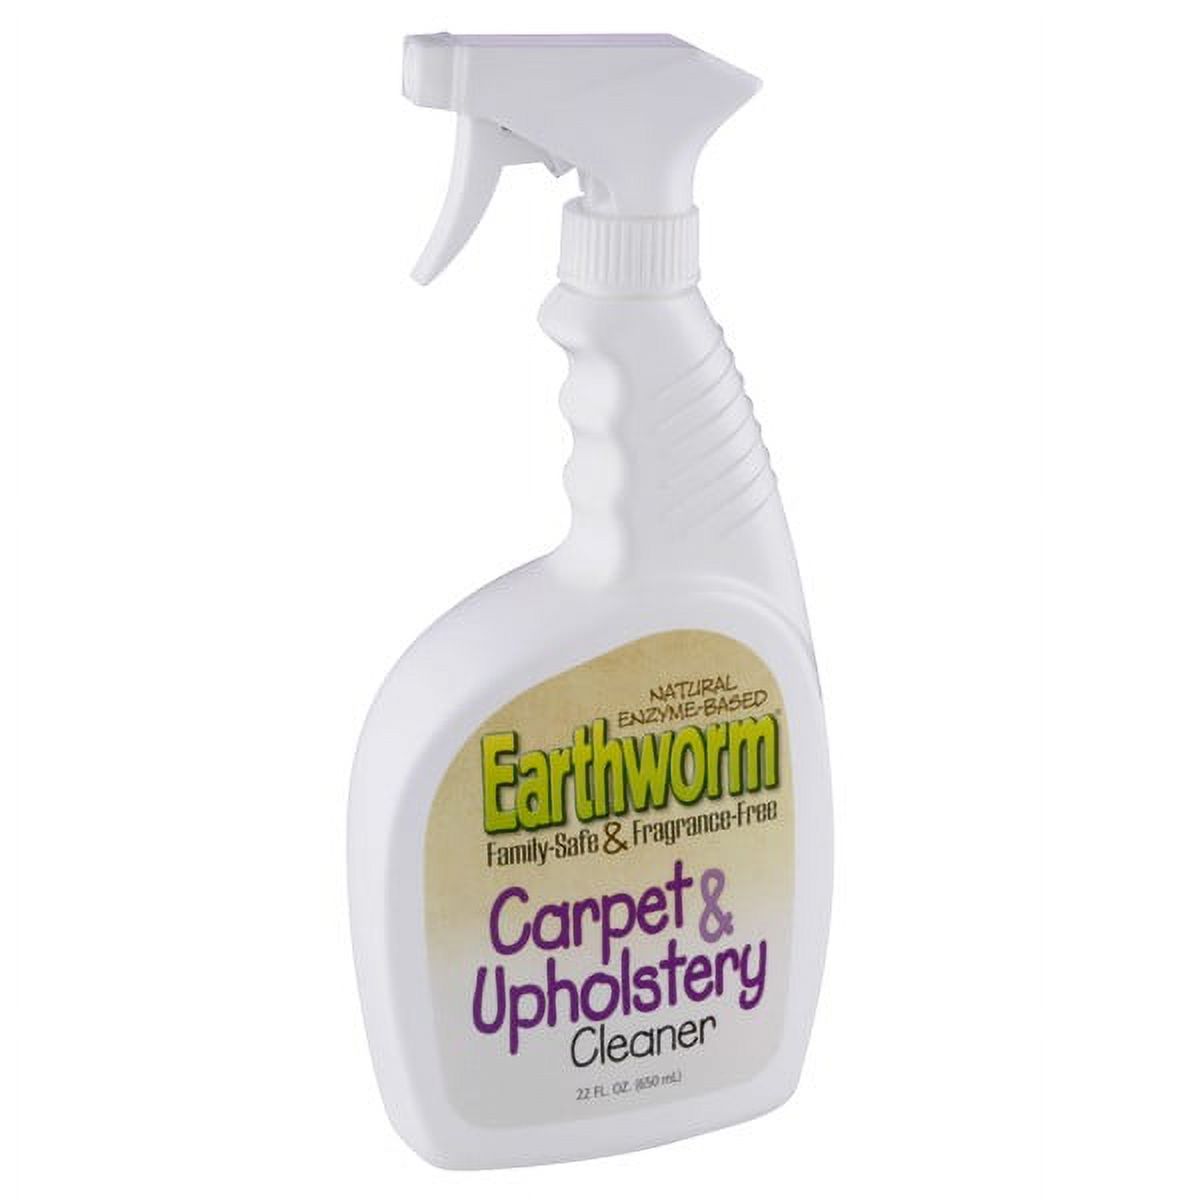 Earthworm Carpet and Upholstery Cleaner - Case of 6 - 22 FL oz. - image 1 of 2